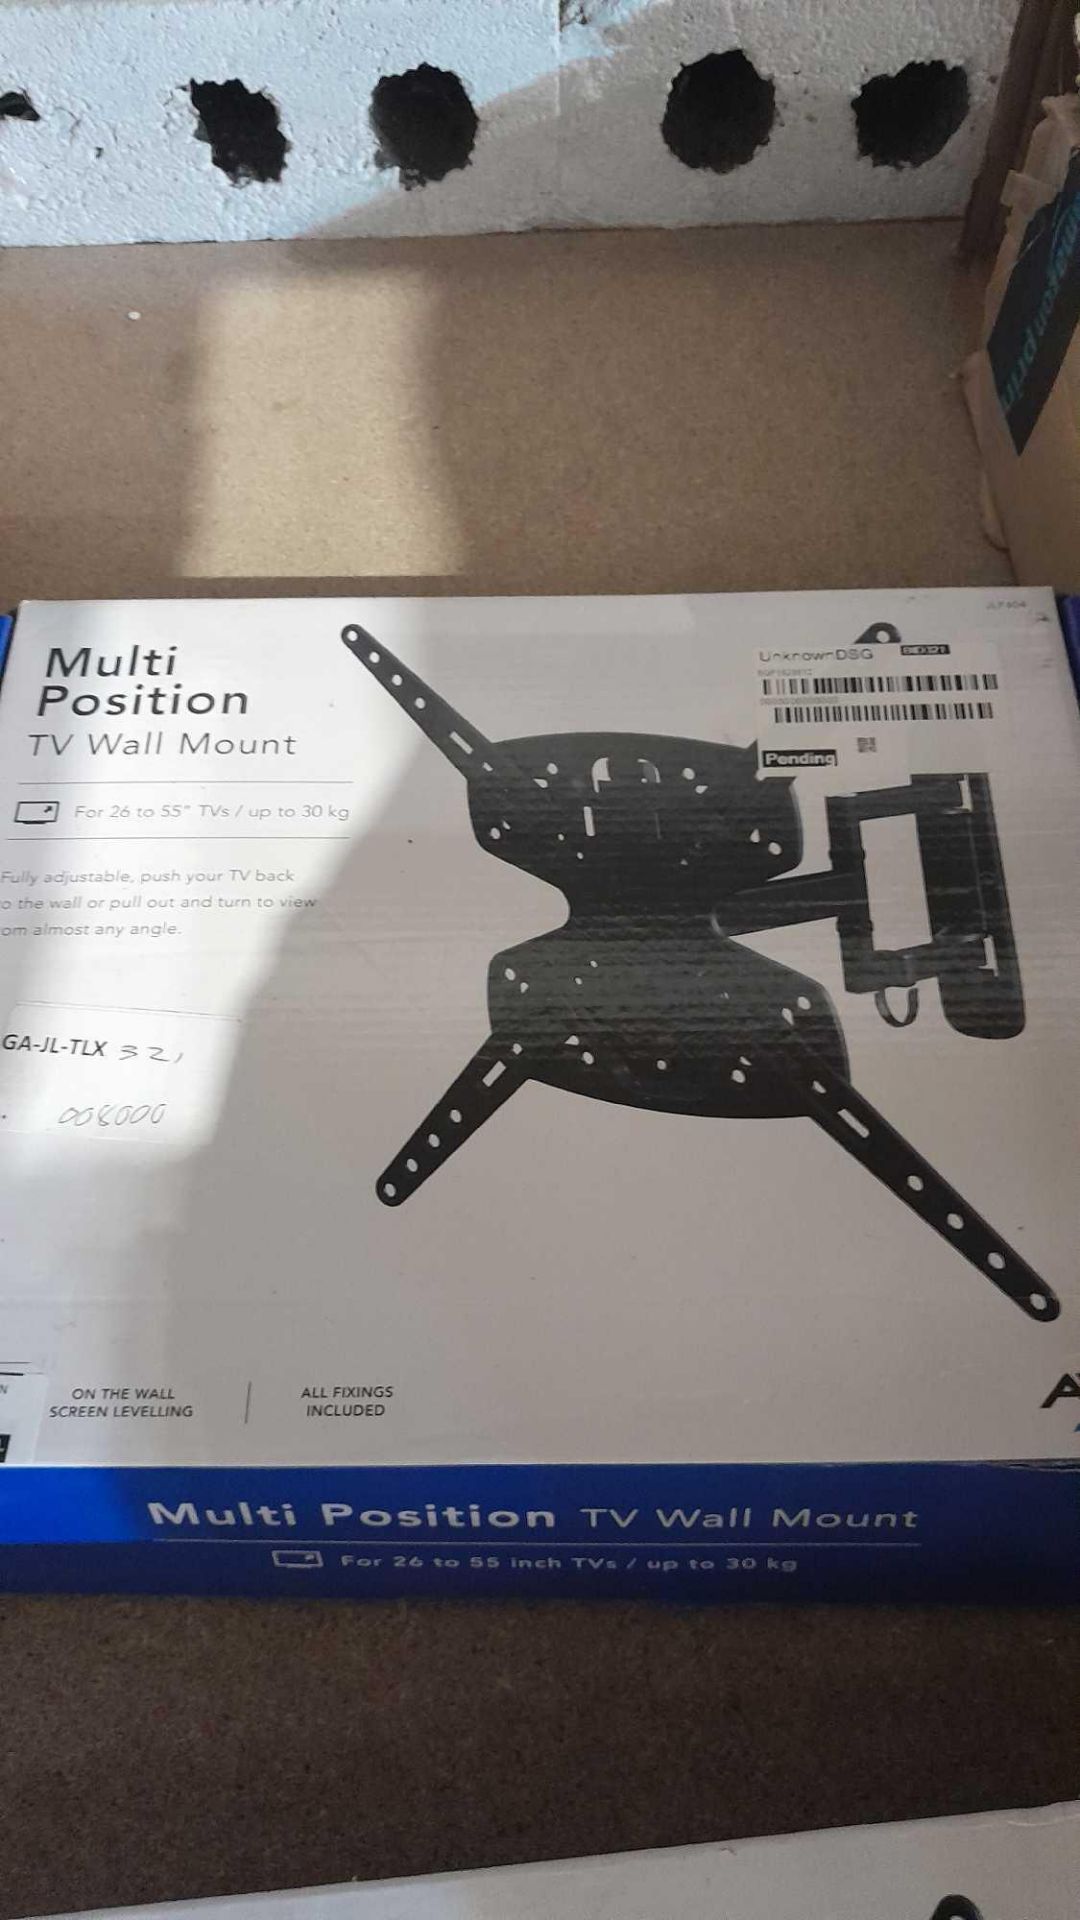 RRP £80 Boxed Avf 26-55" Multi Position Tv Wall Mount - Image 2 of 2